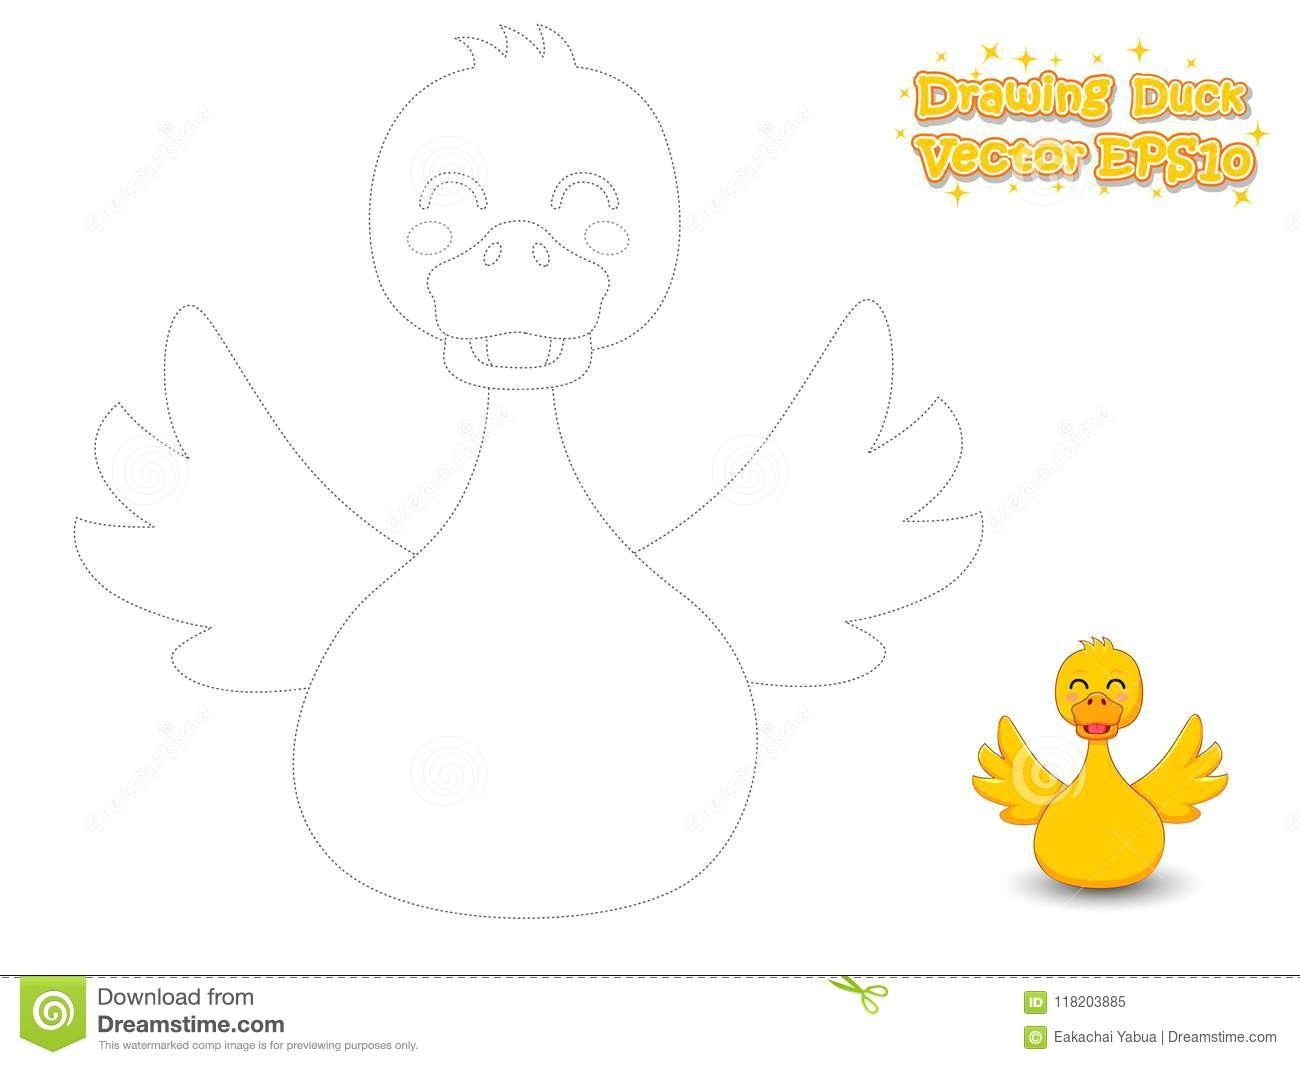 Drawing Cartoons On Illustrator Drawing and Coloring Cute Cartoon Duck Educational Game for Kid